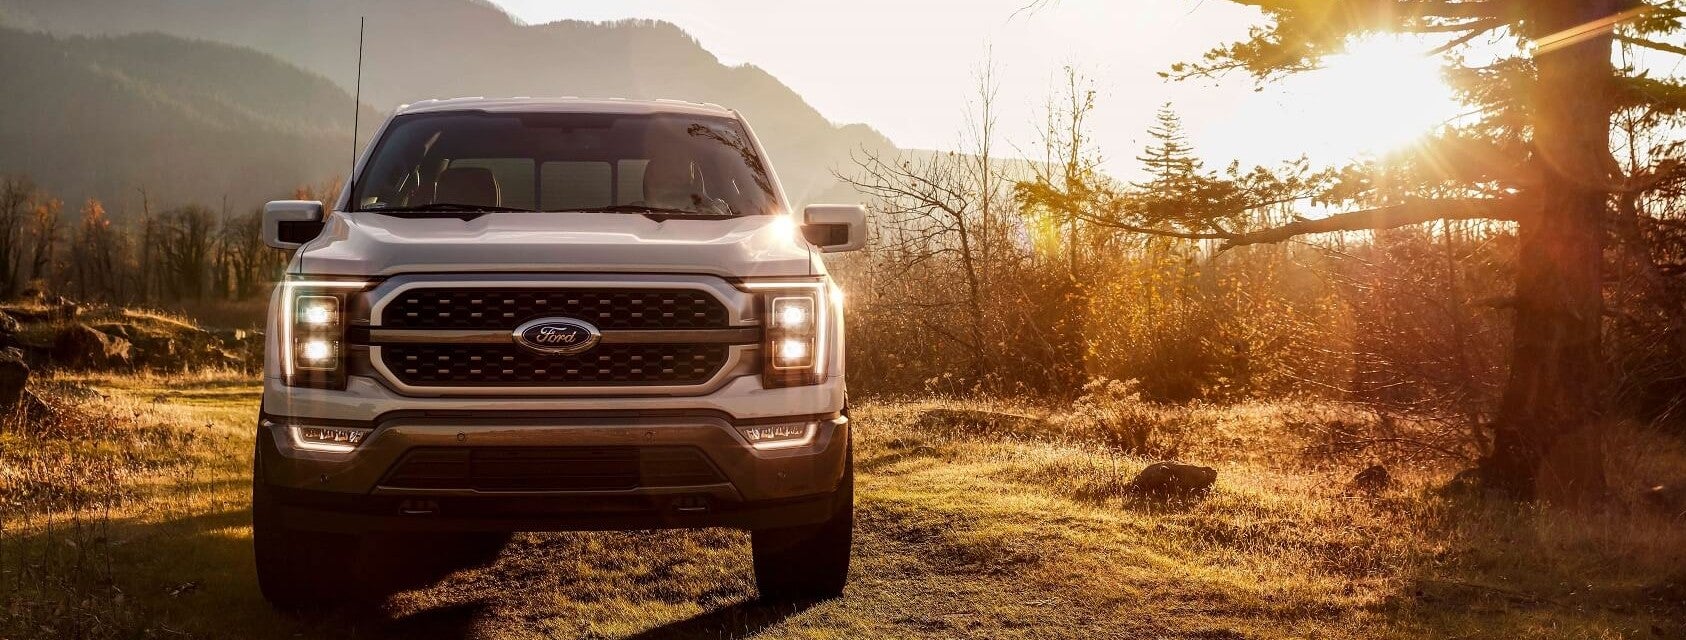 A new white 2021 Ford F-150 with headlights on in a very diverse landscape with mountains in the background.